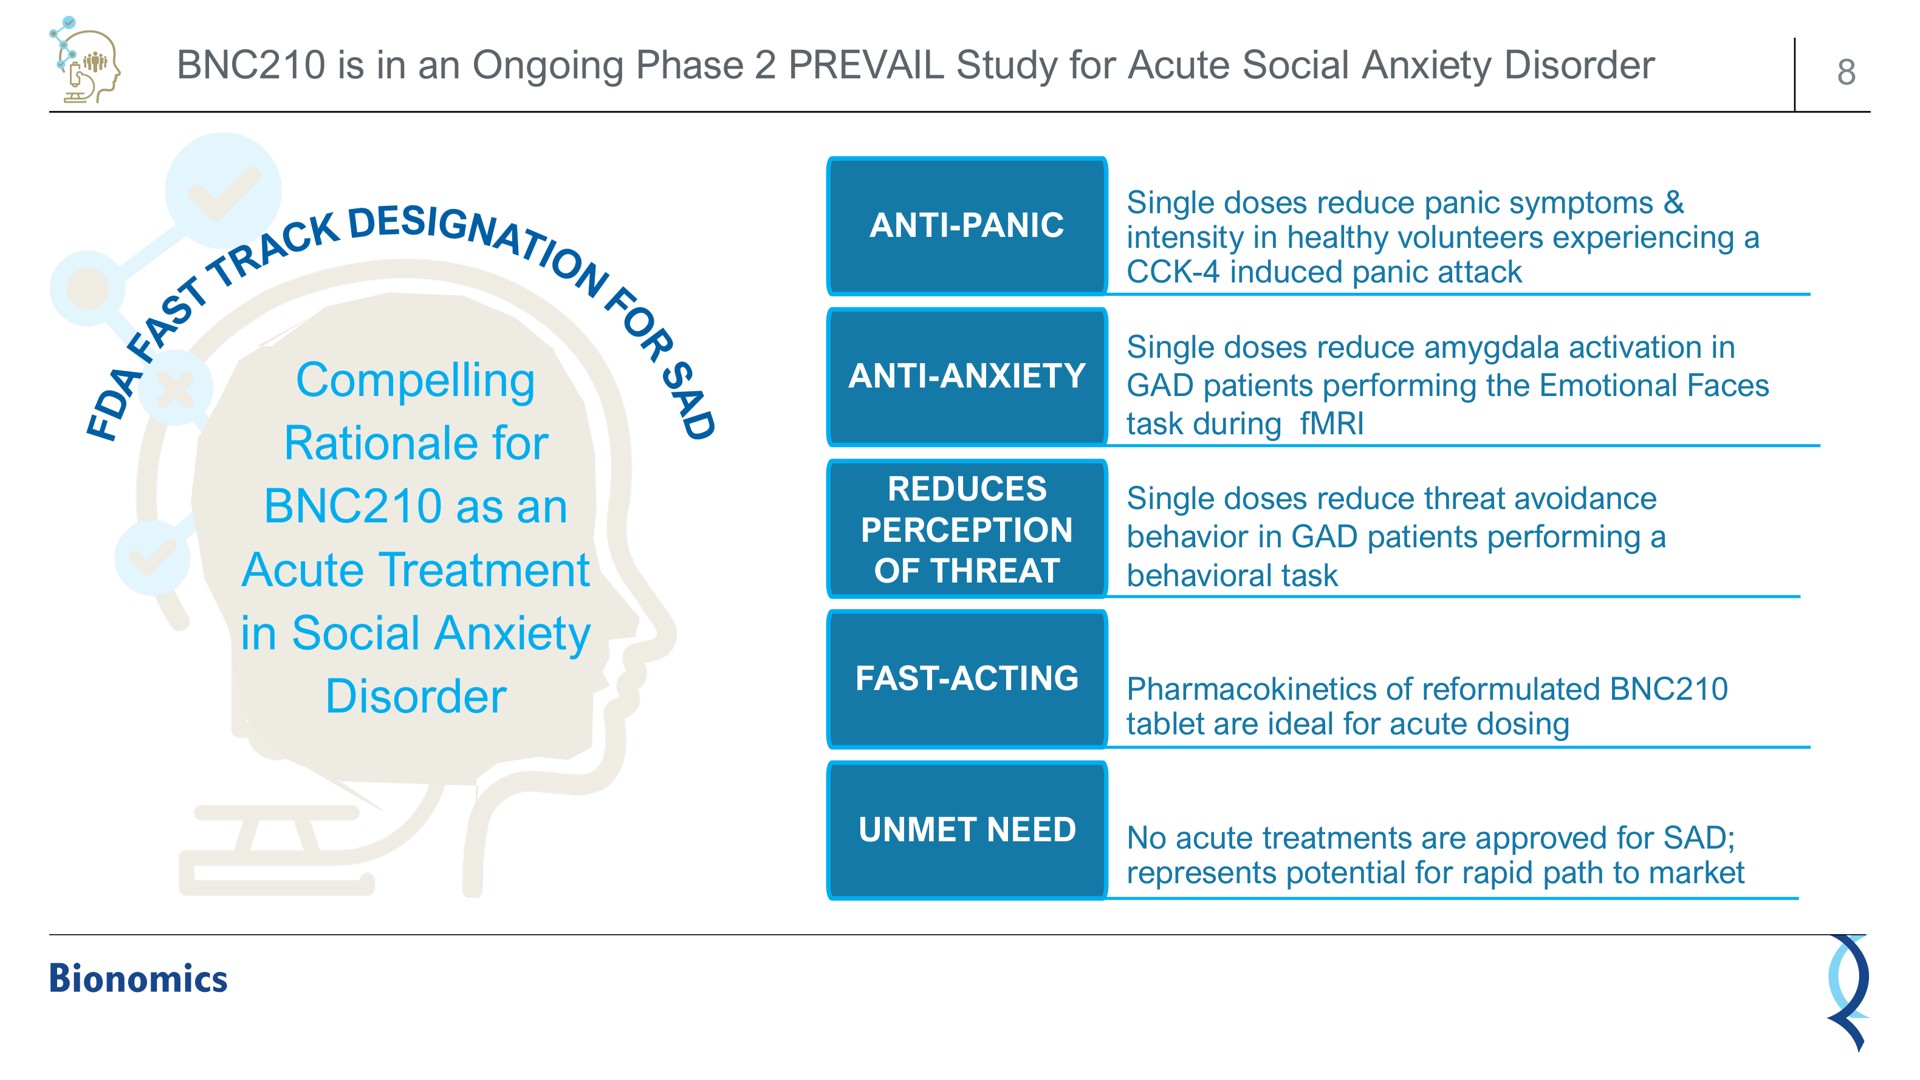 is in an ongoing phase prevail study for acute social anxiety disorder compelling rationale for as an acute treatment in social anxiety disorder behavioral task | Bionomics